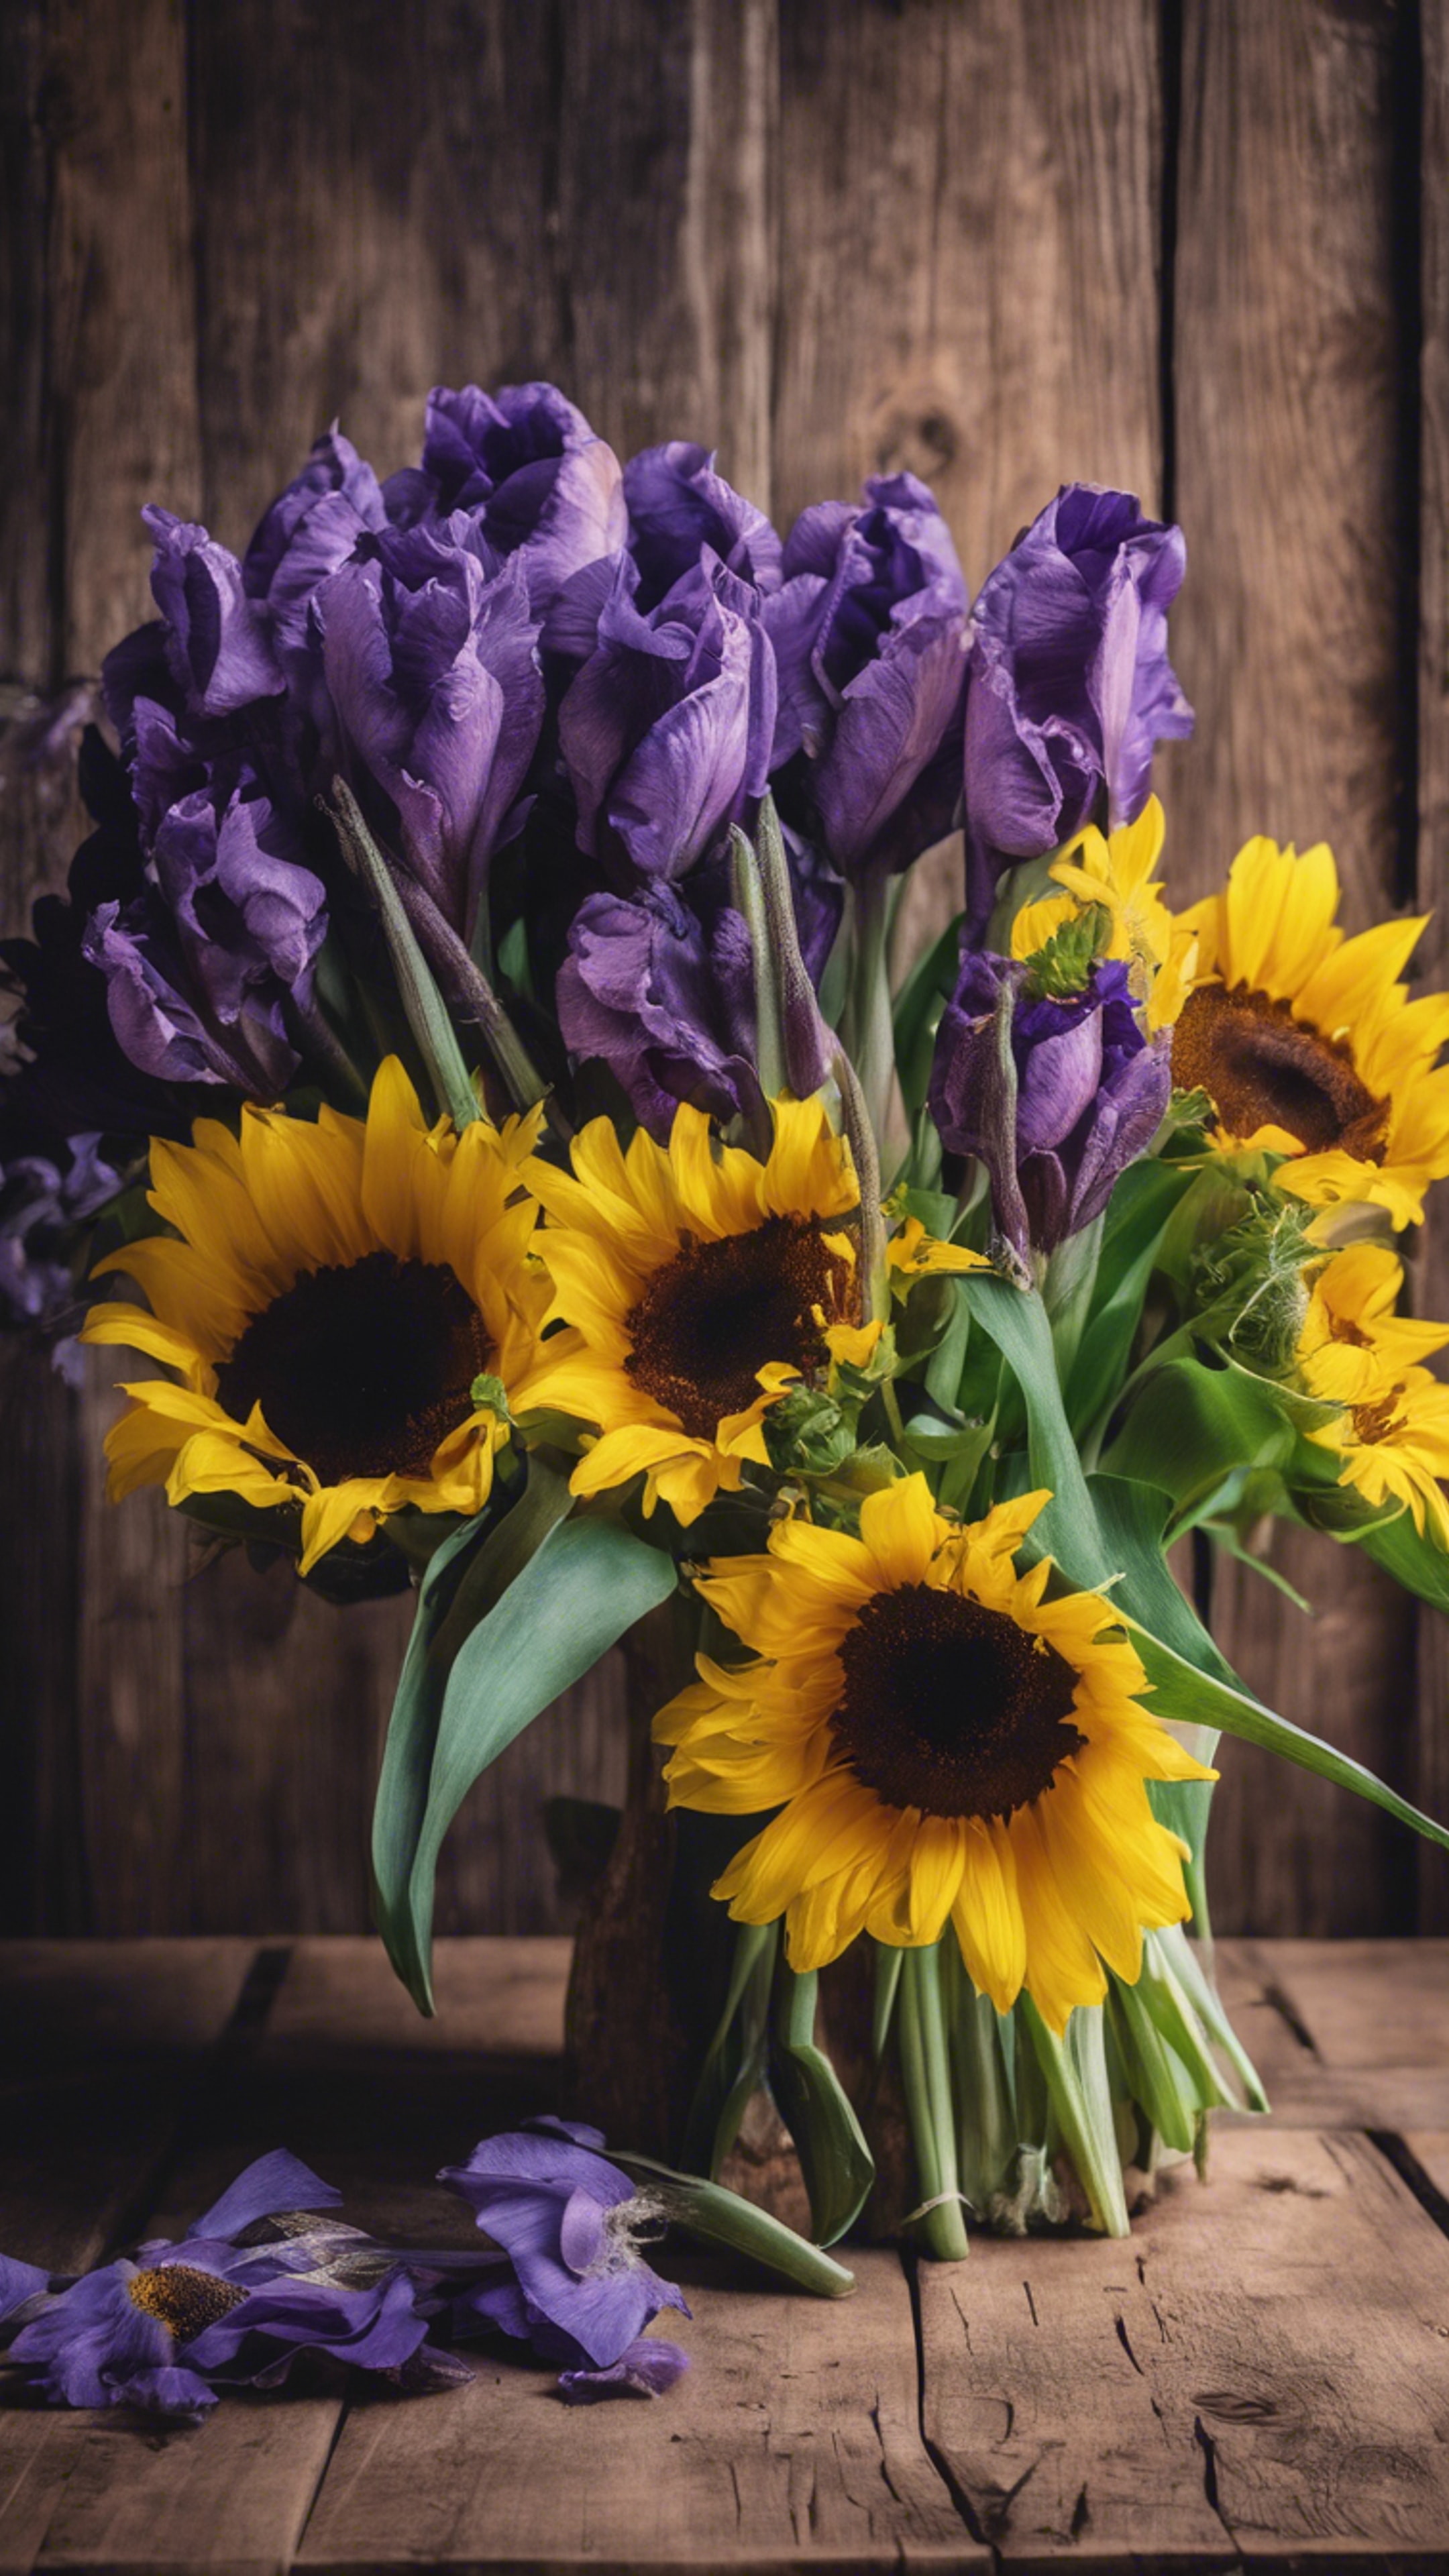 A bouquet of violet irises and bright yellow sunflowers sitting on a rustic wooden table. Hình nền[036542cc0bff4a9eafa2]